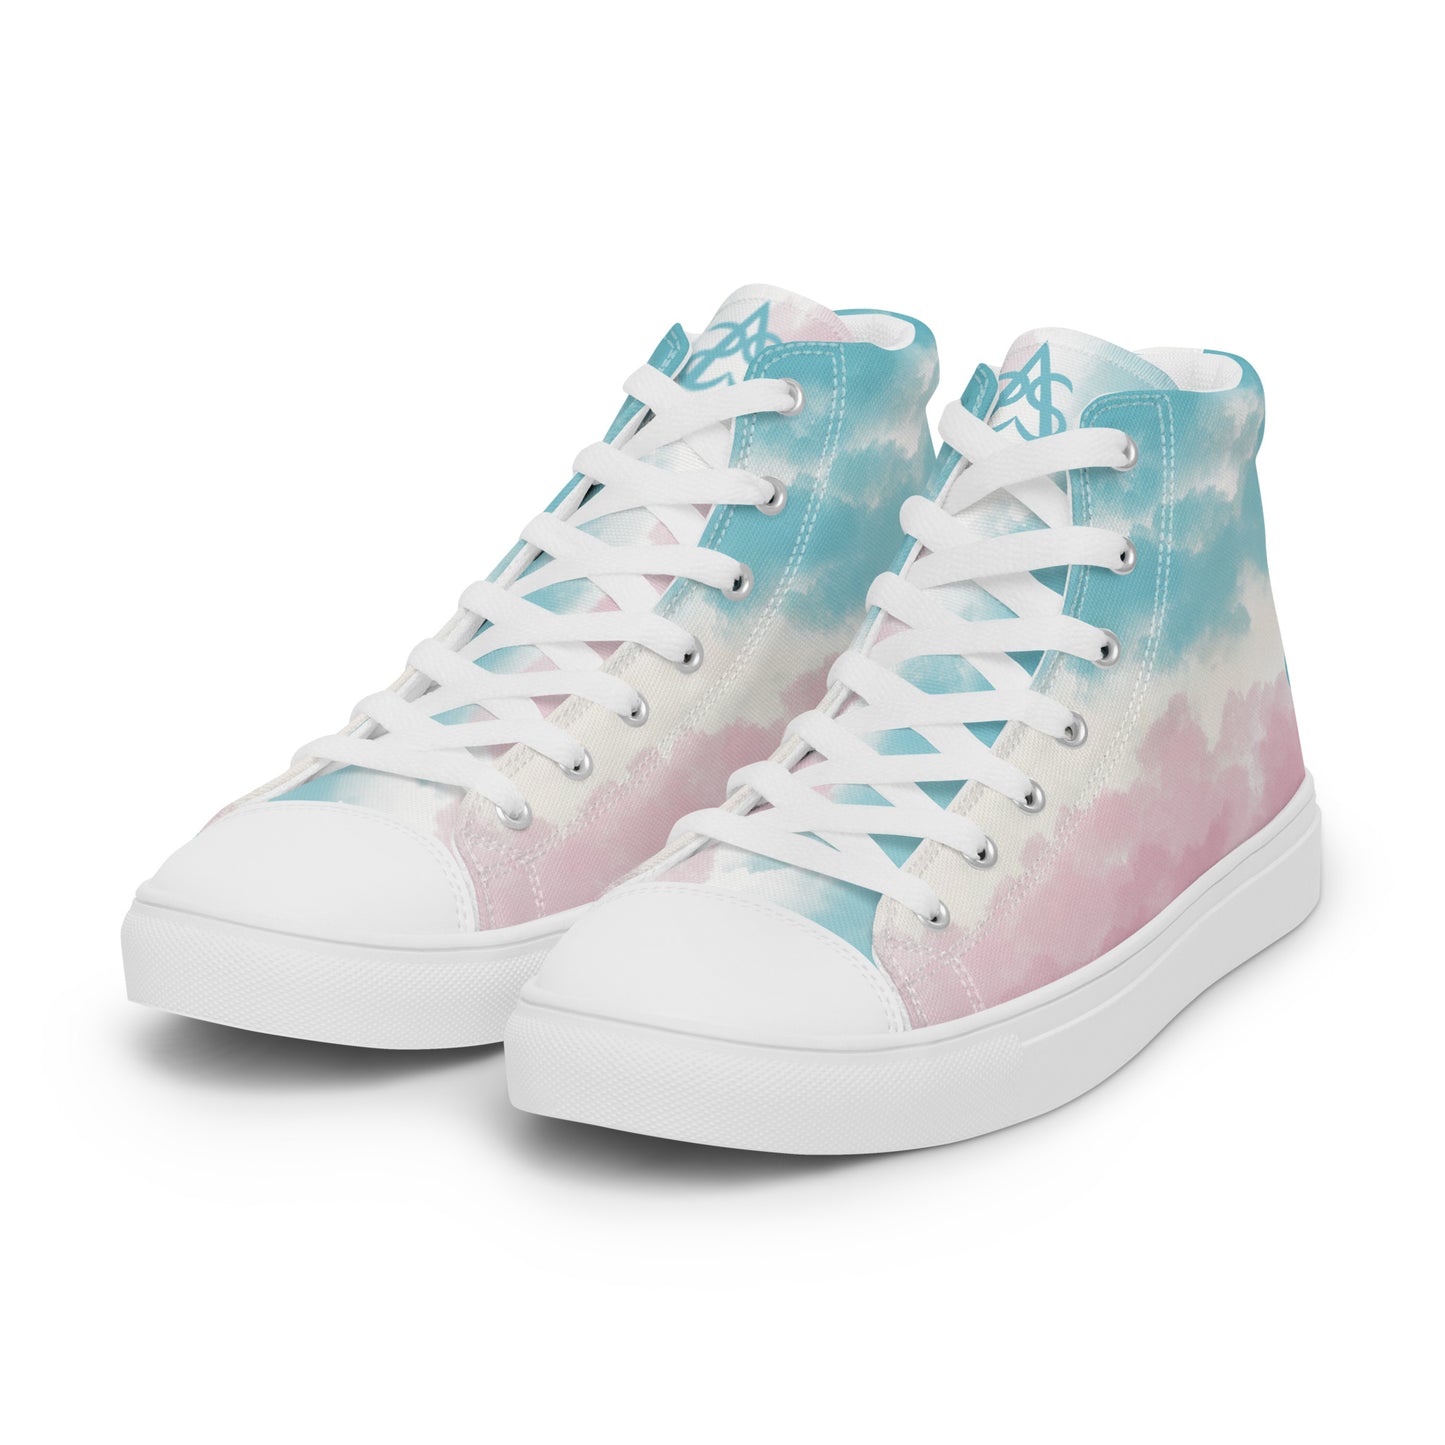 Left front view: High top shoes with a cloudy design in blue, white, and pink has a doodle style heart on the heel, white shoe laces, and white details.